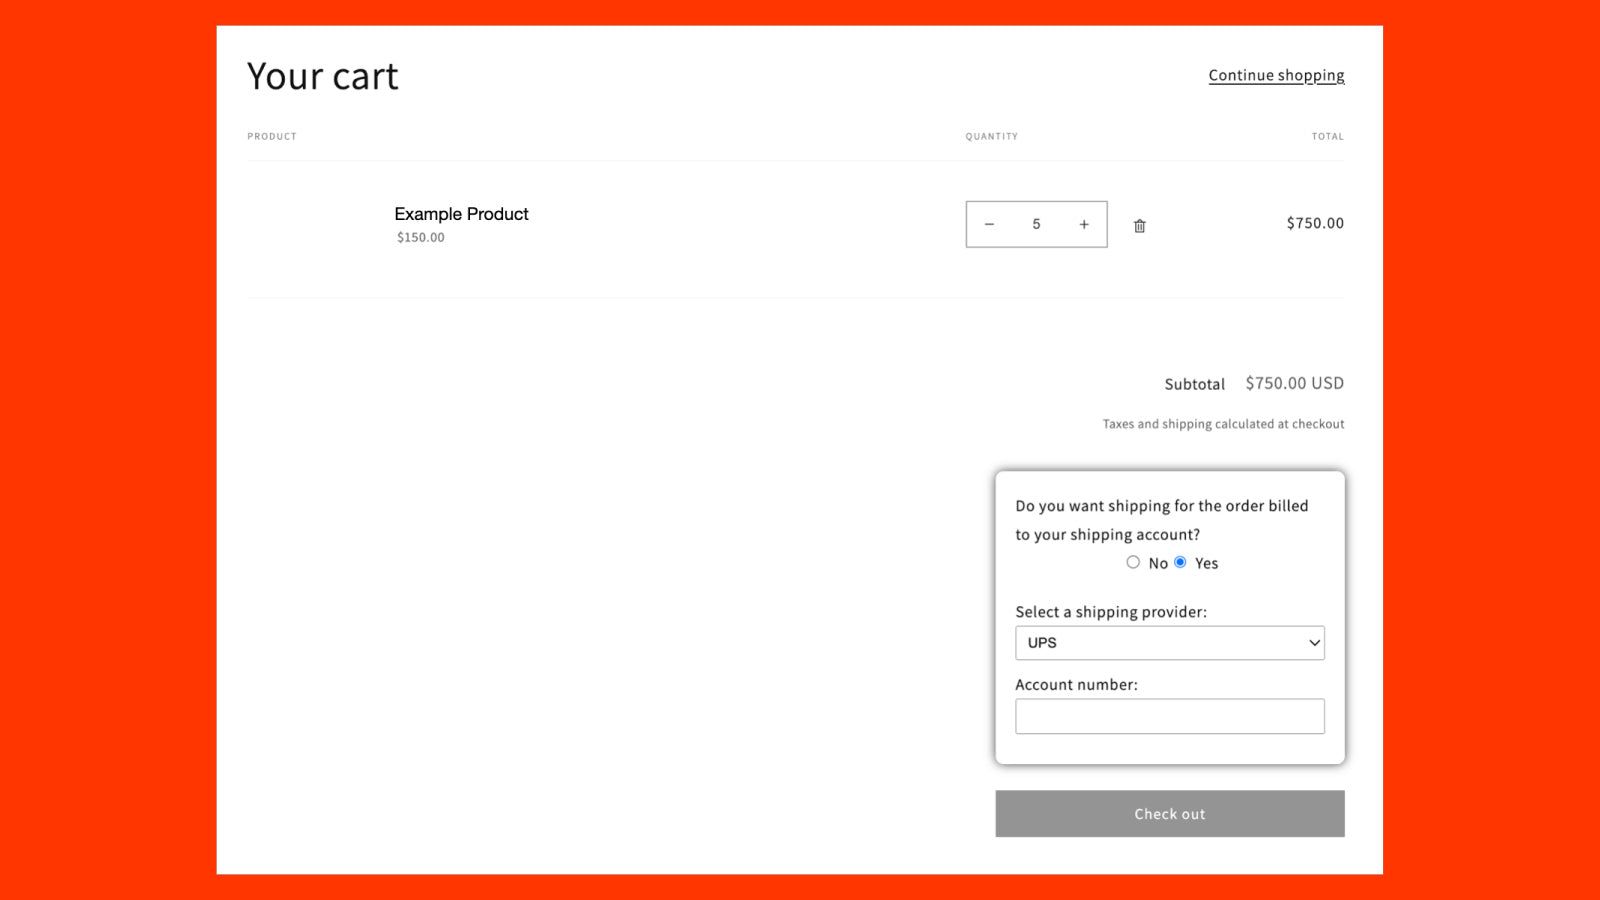 Bill-to shipping account option on Cart page.